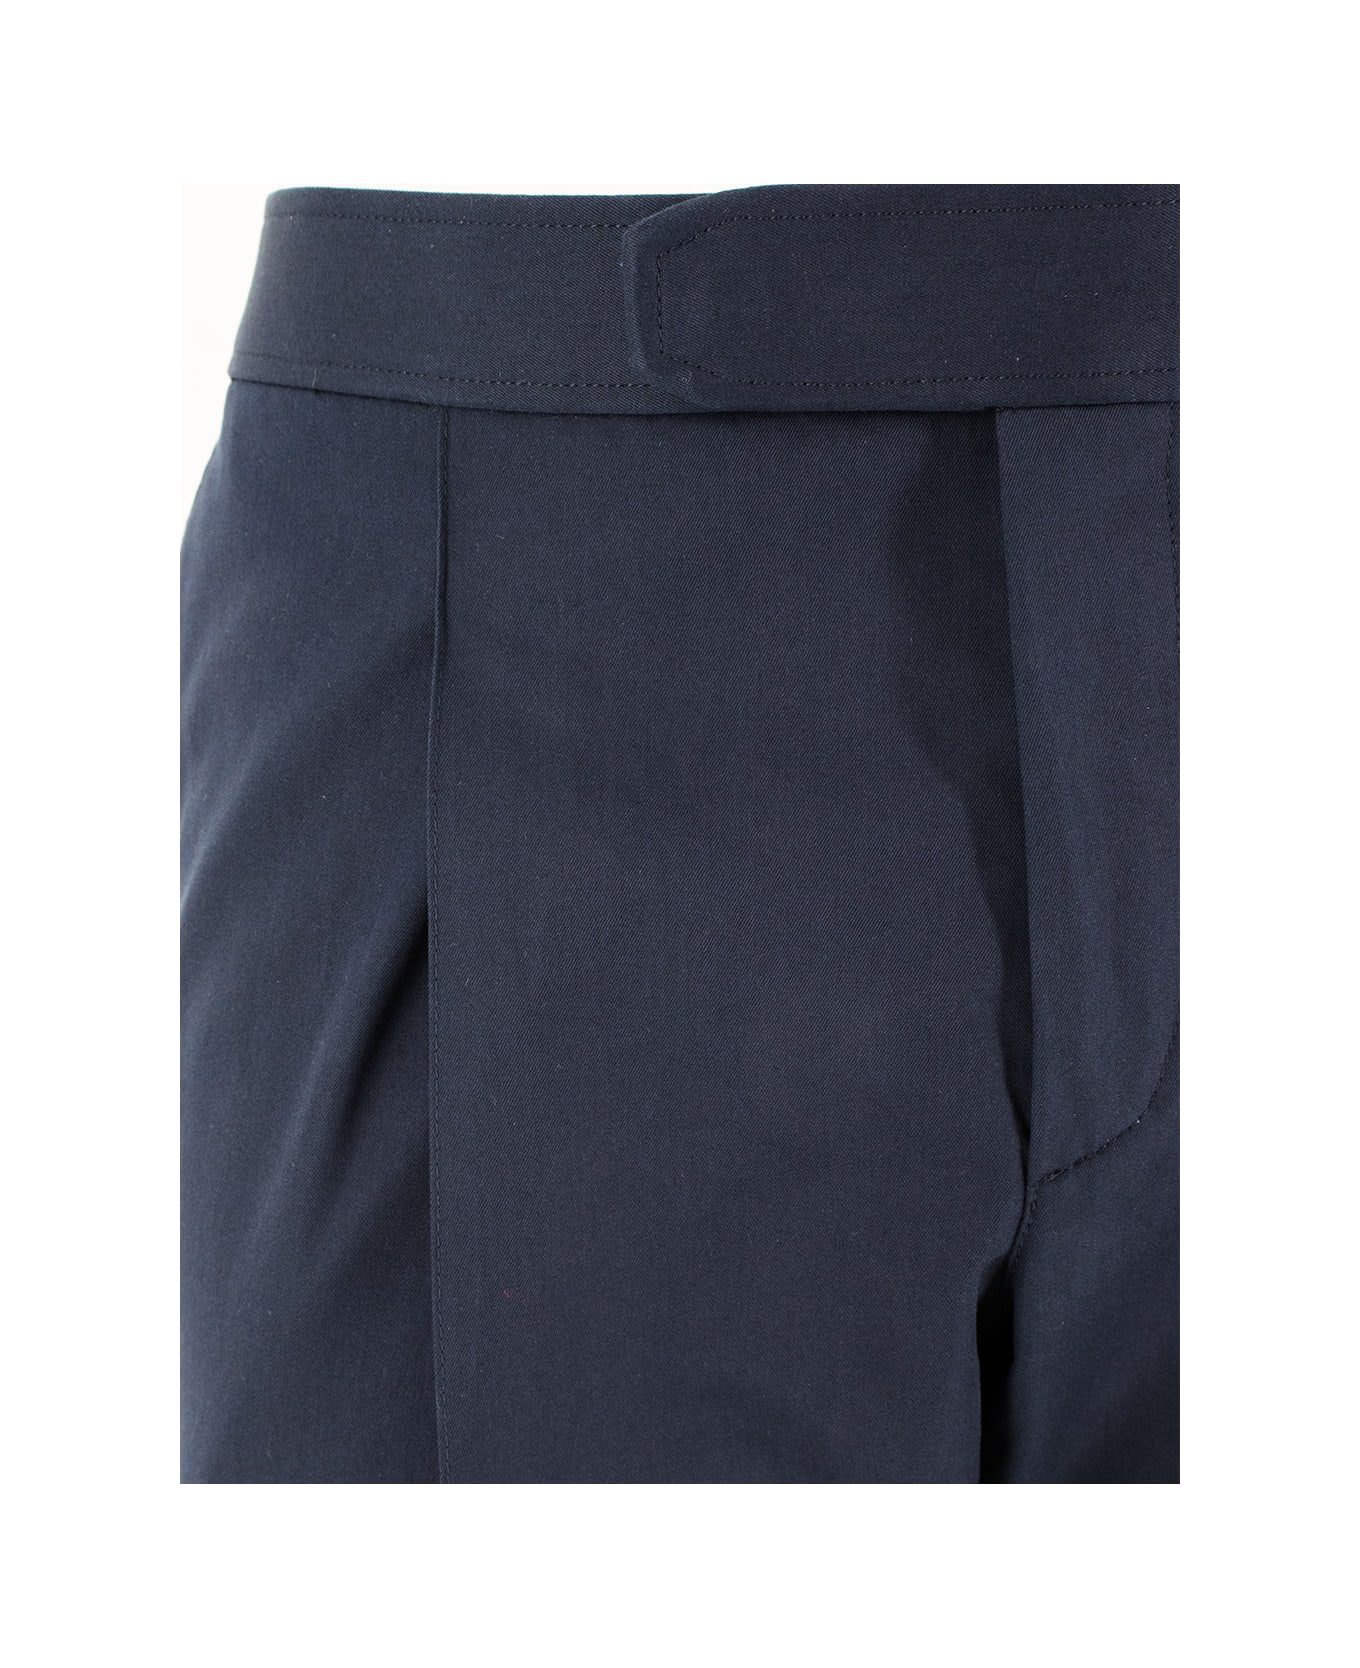 Brioni Trousers - MIDNIGHT BLUE ボトムス